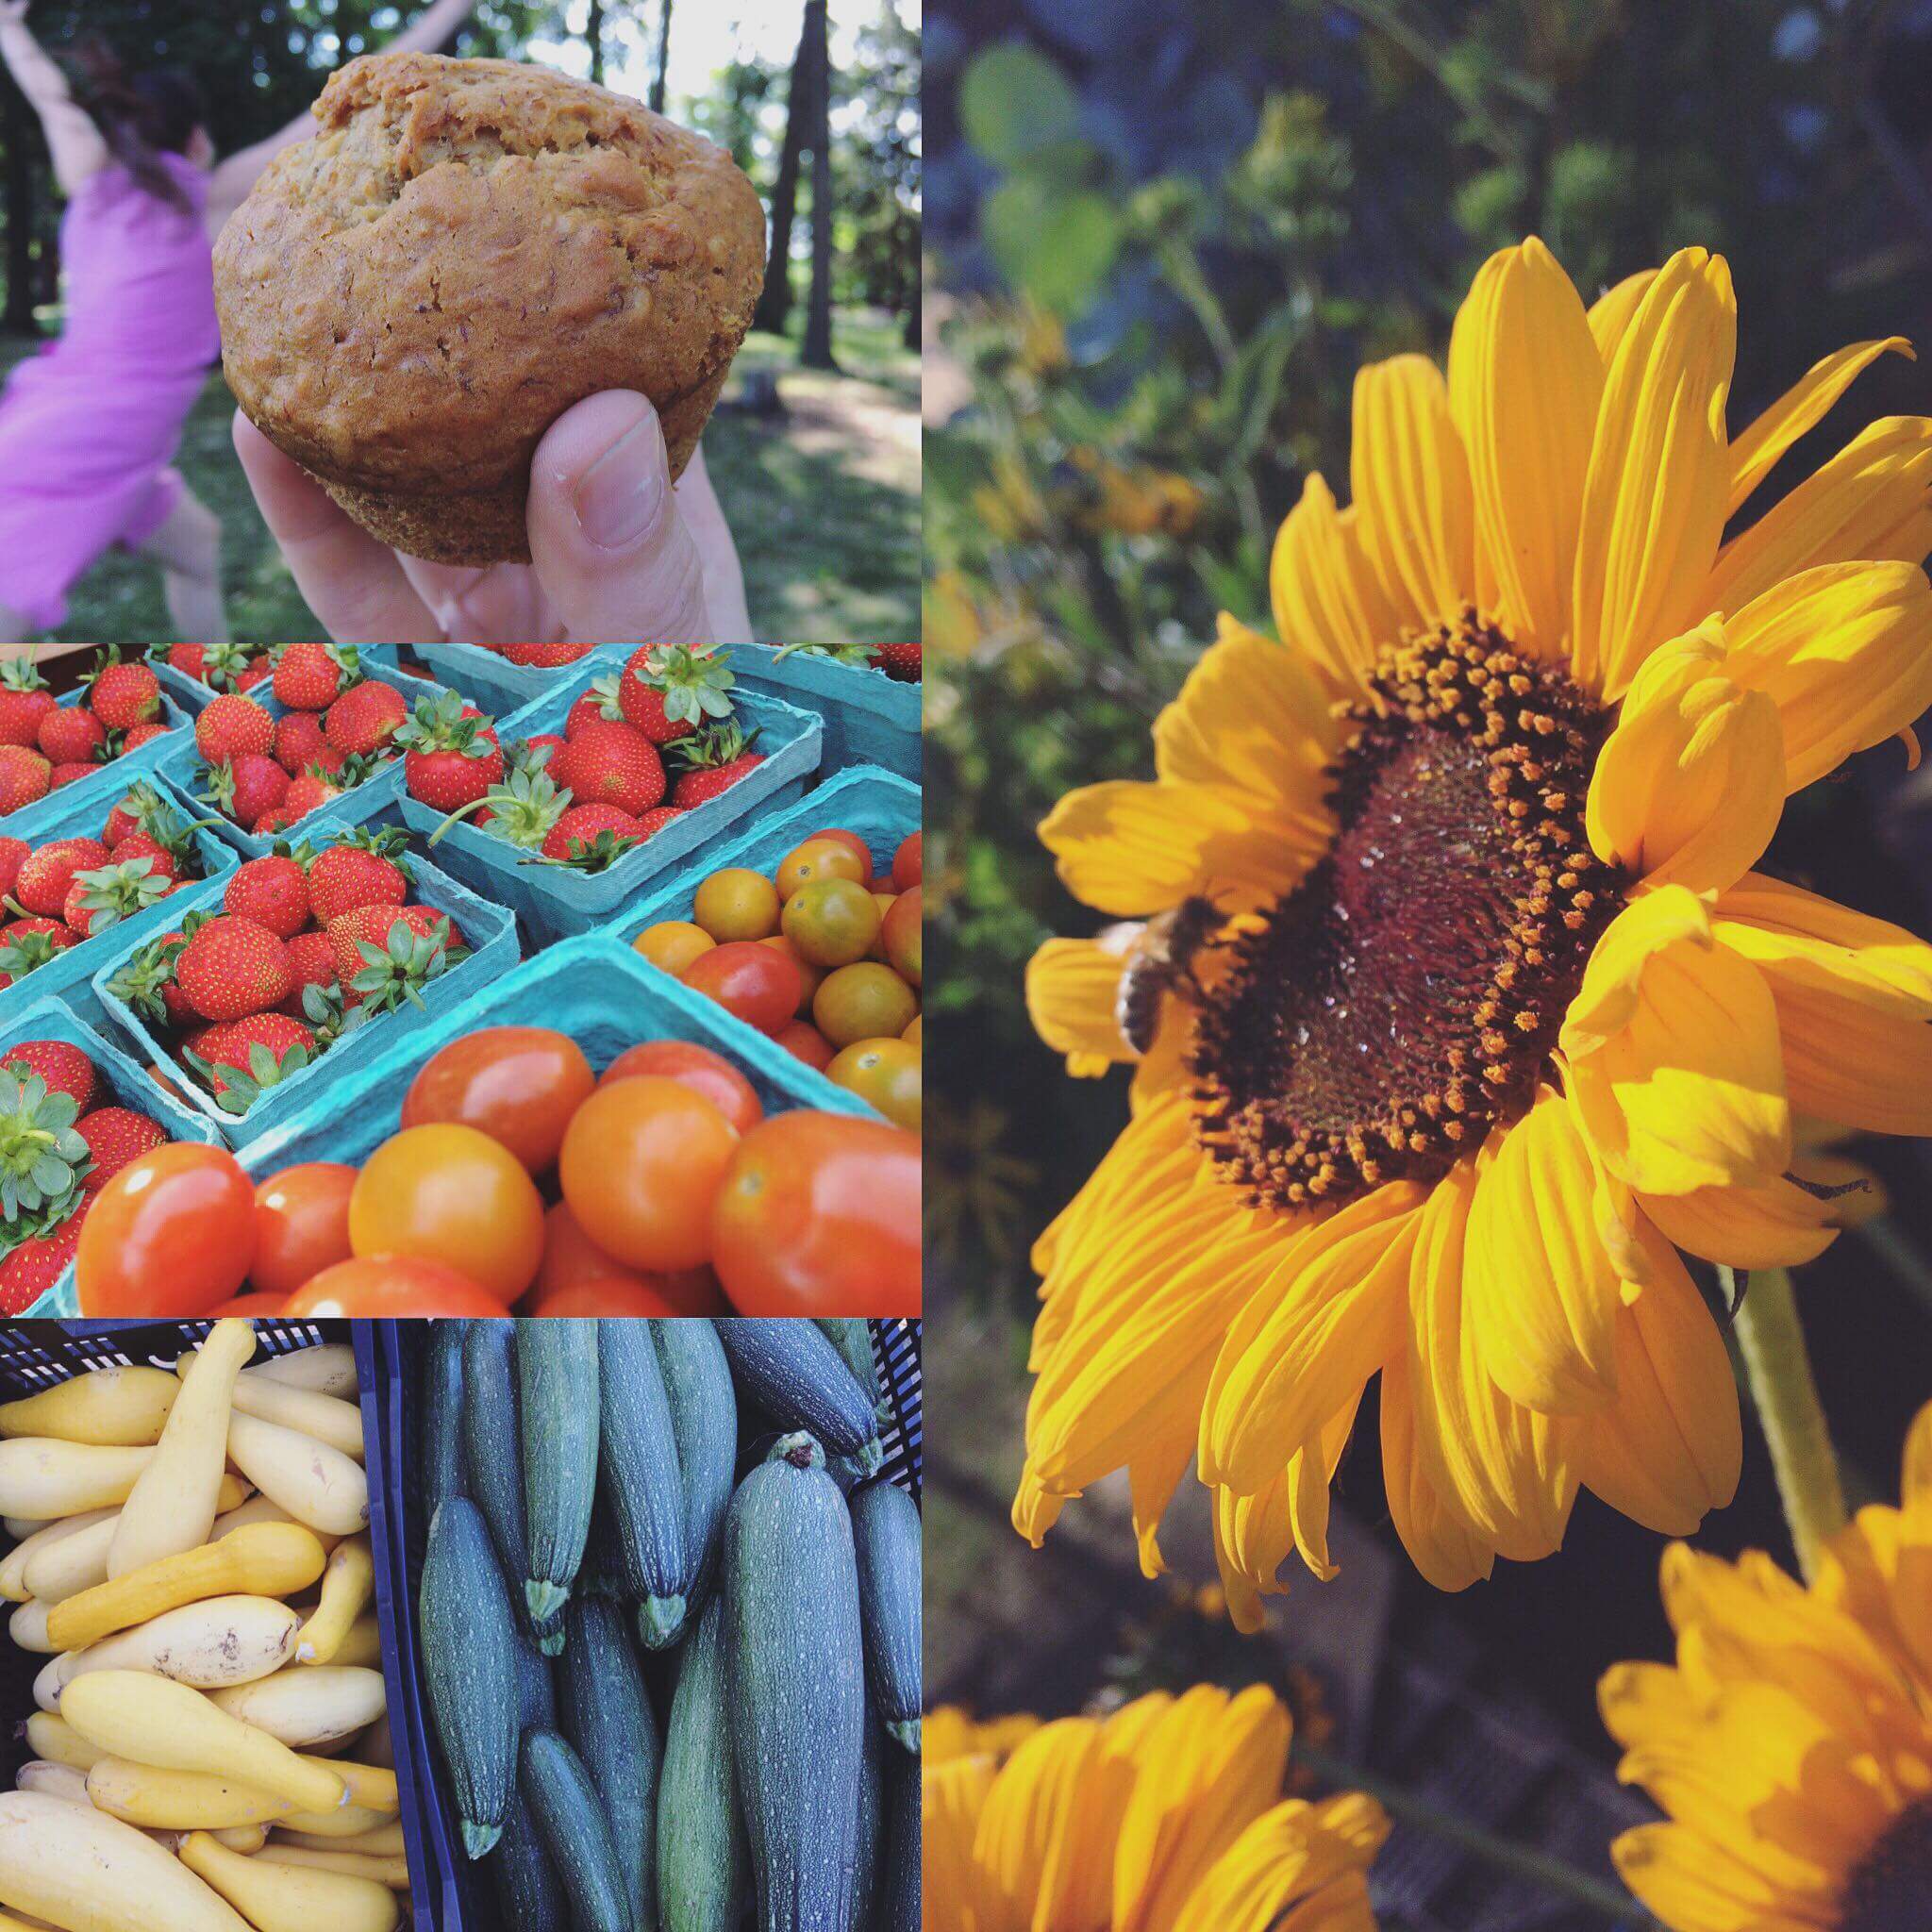 [CREDIT: Goddard Park] Among the Warwick weekend events on deck this week is the Goddard Park Farmer's market.